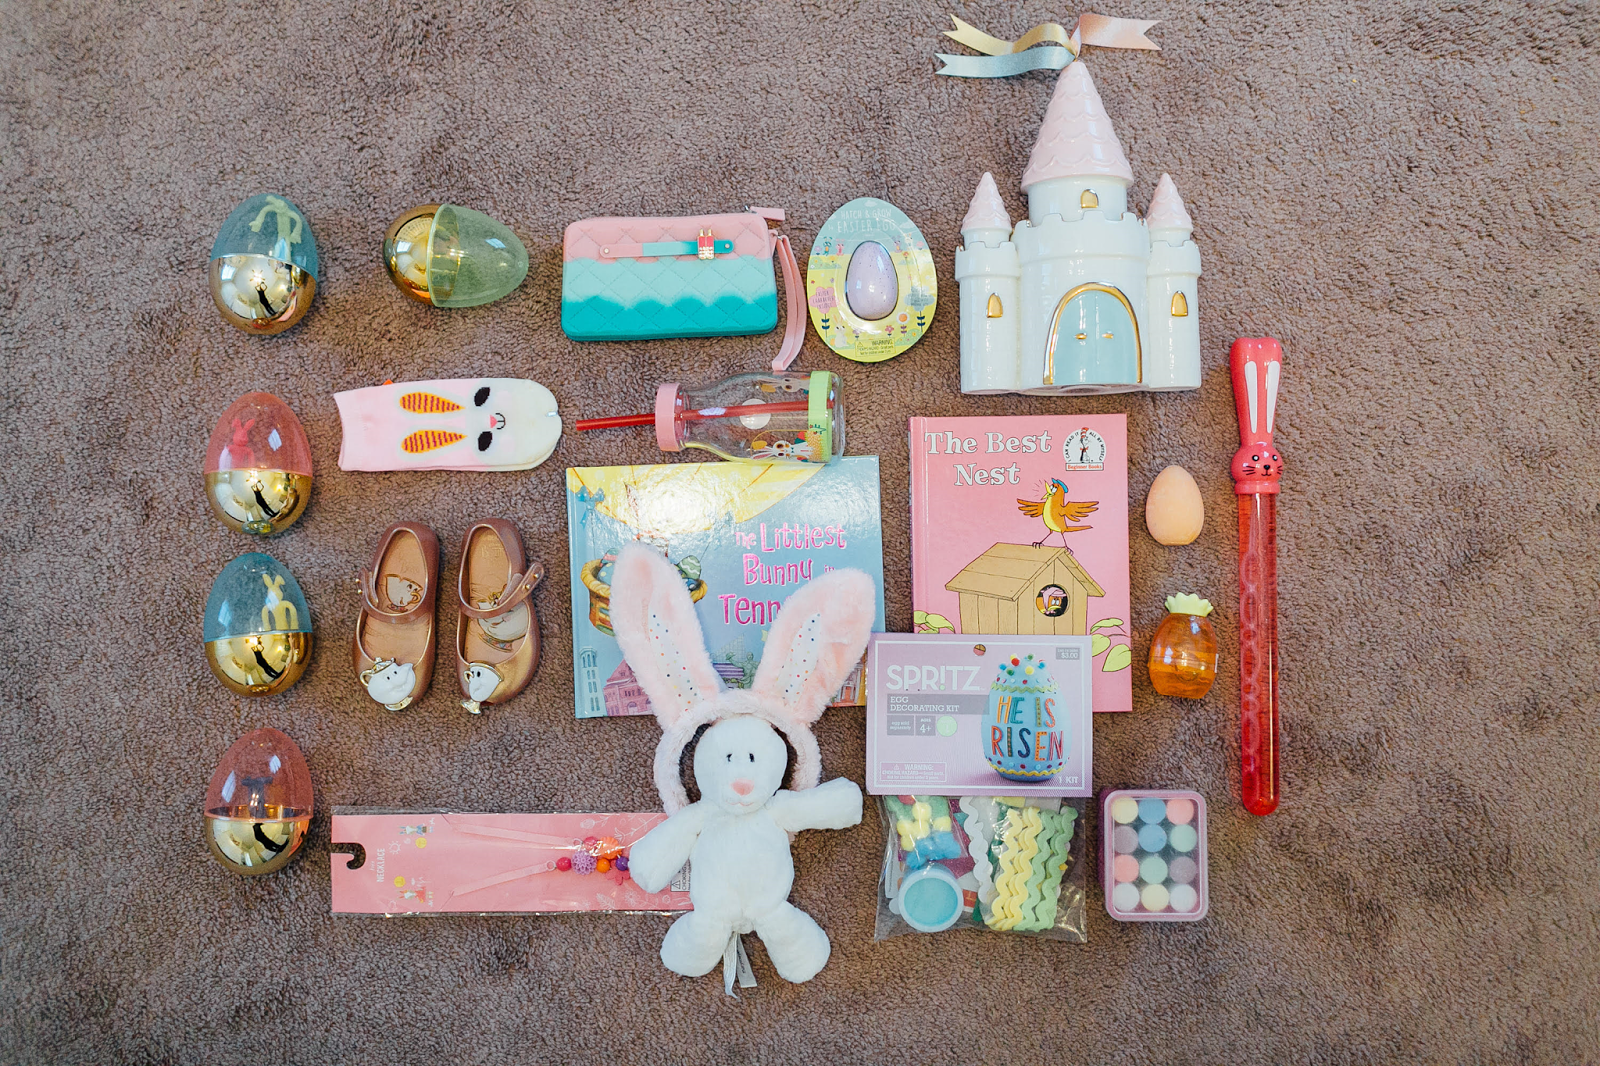 Non-Candy Easter Basket Ideas for Your Child by Laura from Walking in Memphis in High Heels